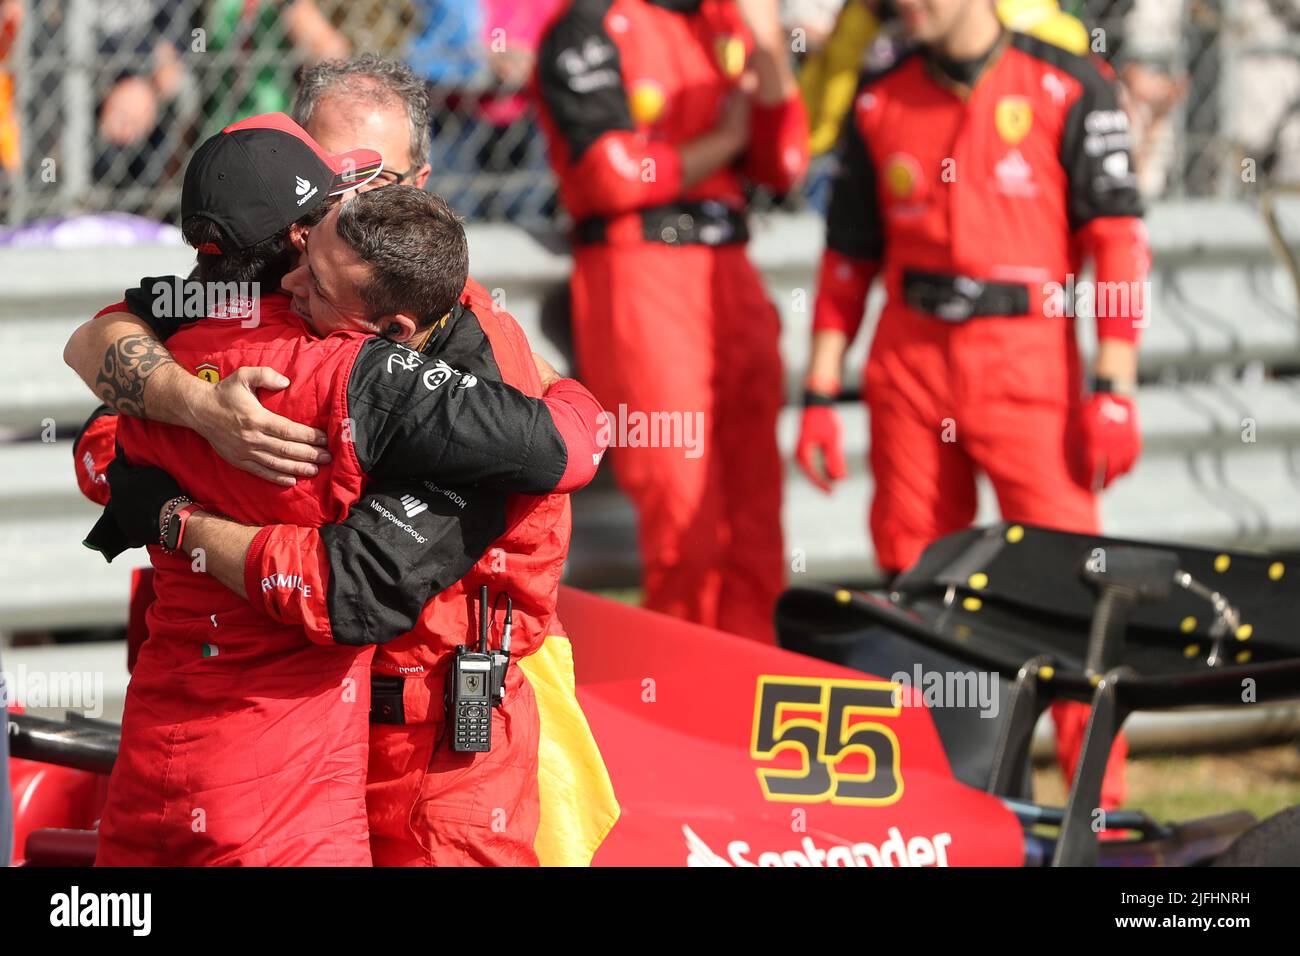 Silverstone, UK. 3rd July 2022,  Silverstone Circuit, Silverstone, Northamptonshire, England: British F1 Grand Prix, Race day: Scuderia Ferrari, Carlos Sainz wins the British GP and is hugged by a team member Credit: Action Plus Sports Images/Alamy Live News Stock Photo